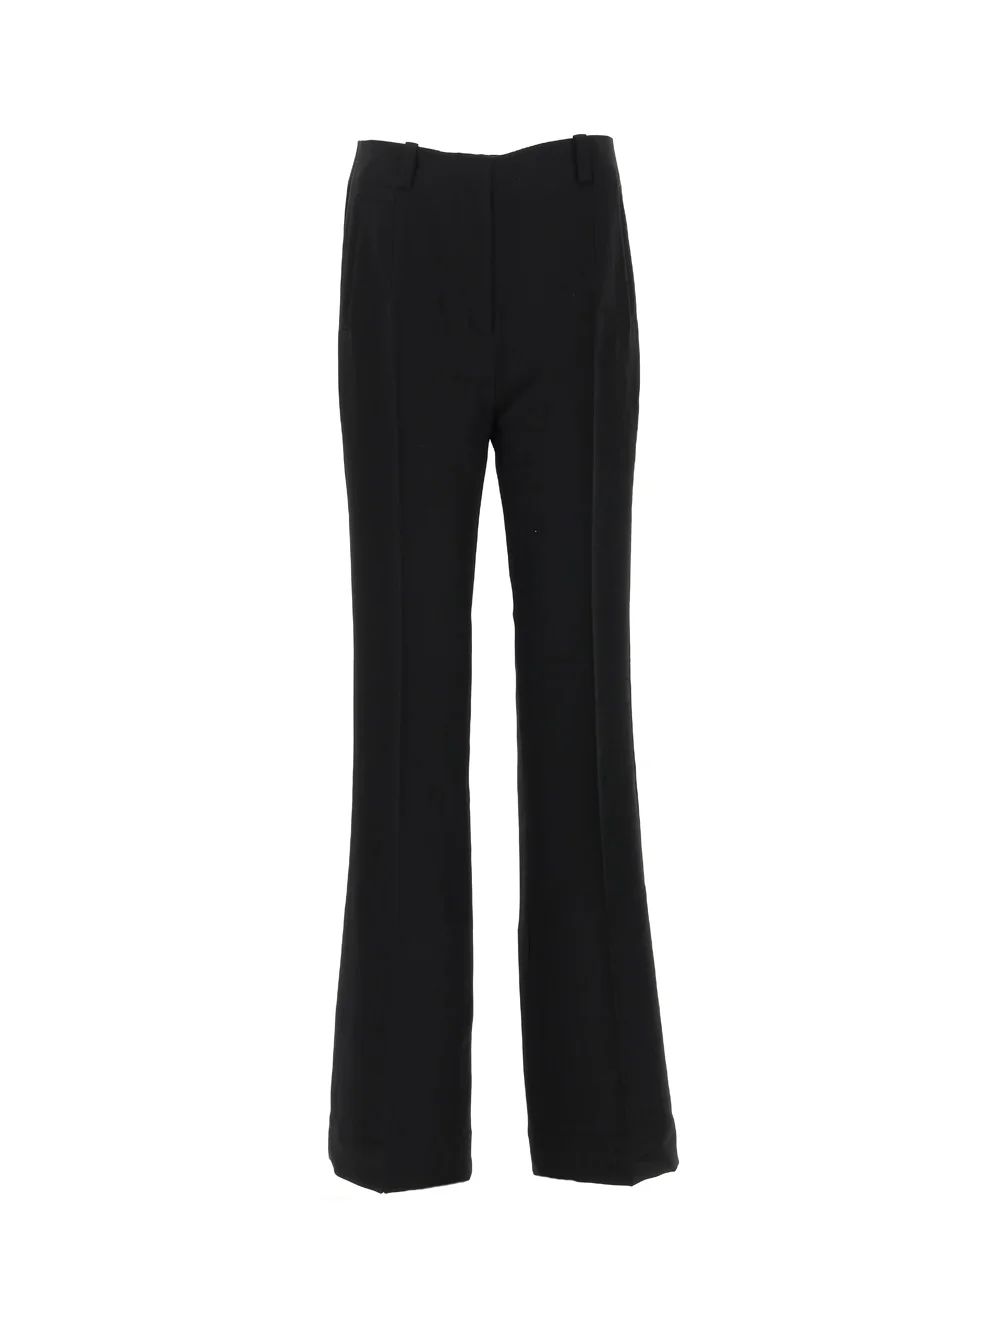 Khaite The Amelie Flared Tailored Trousers | Cettire Global